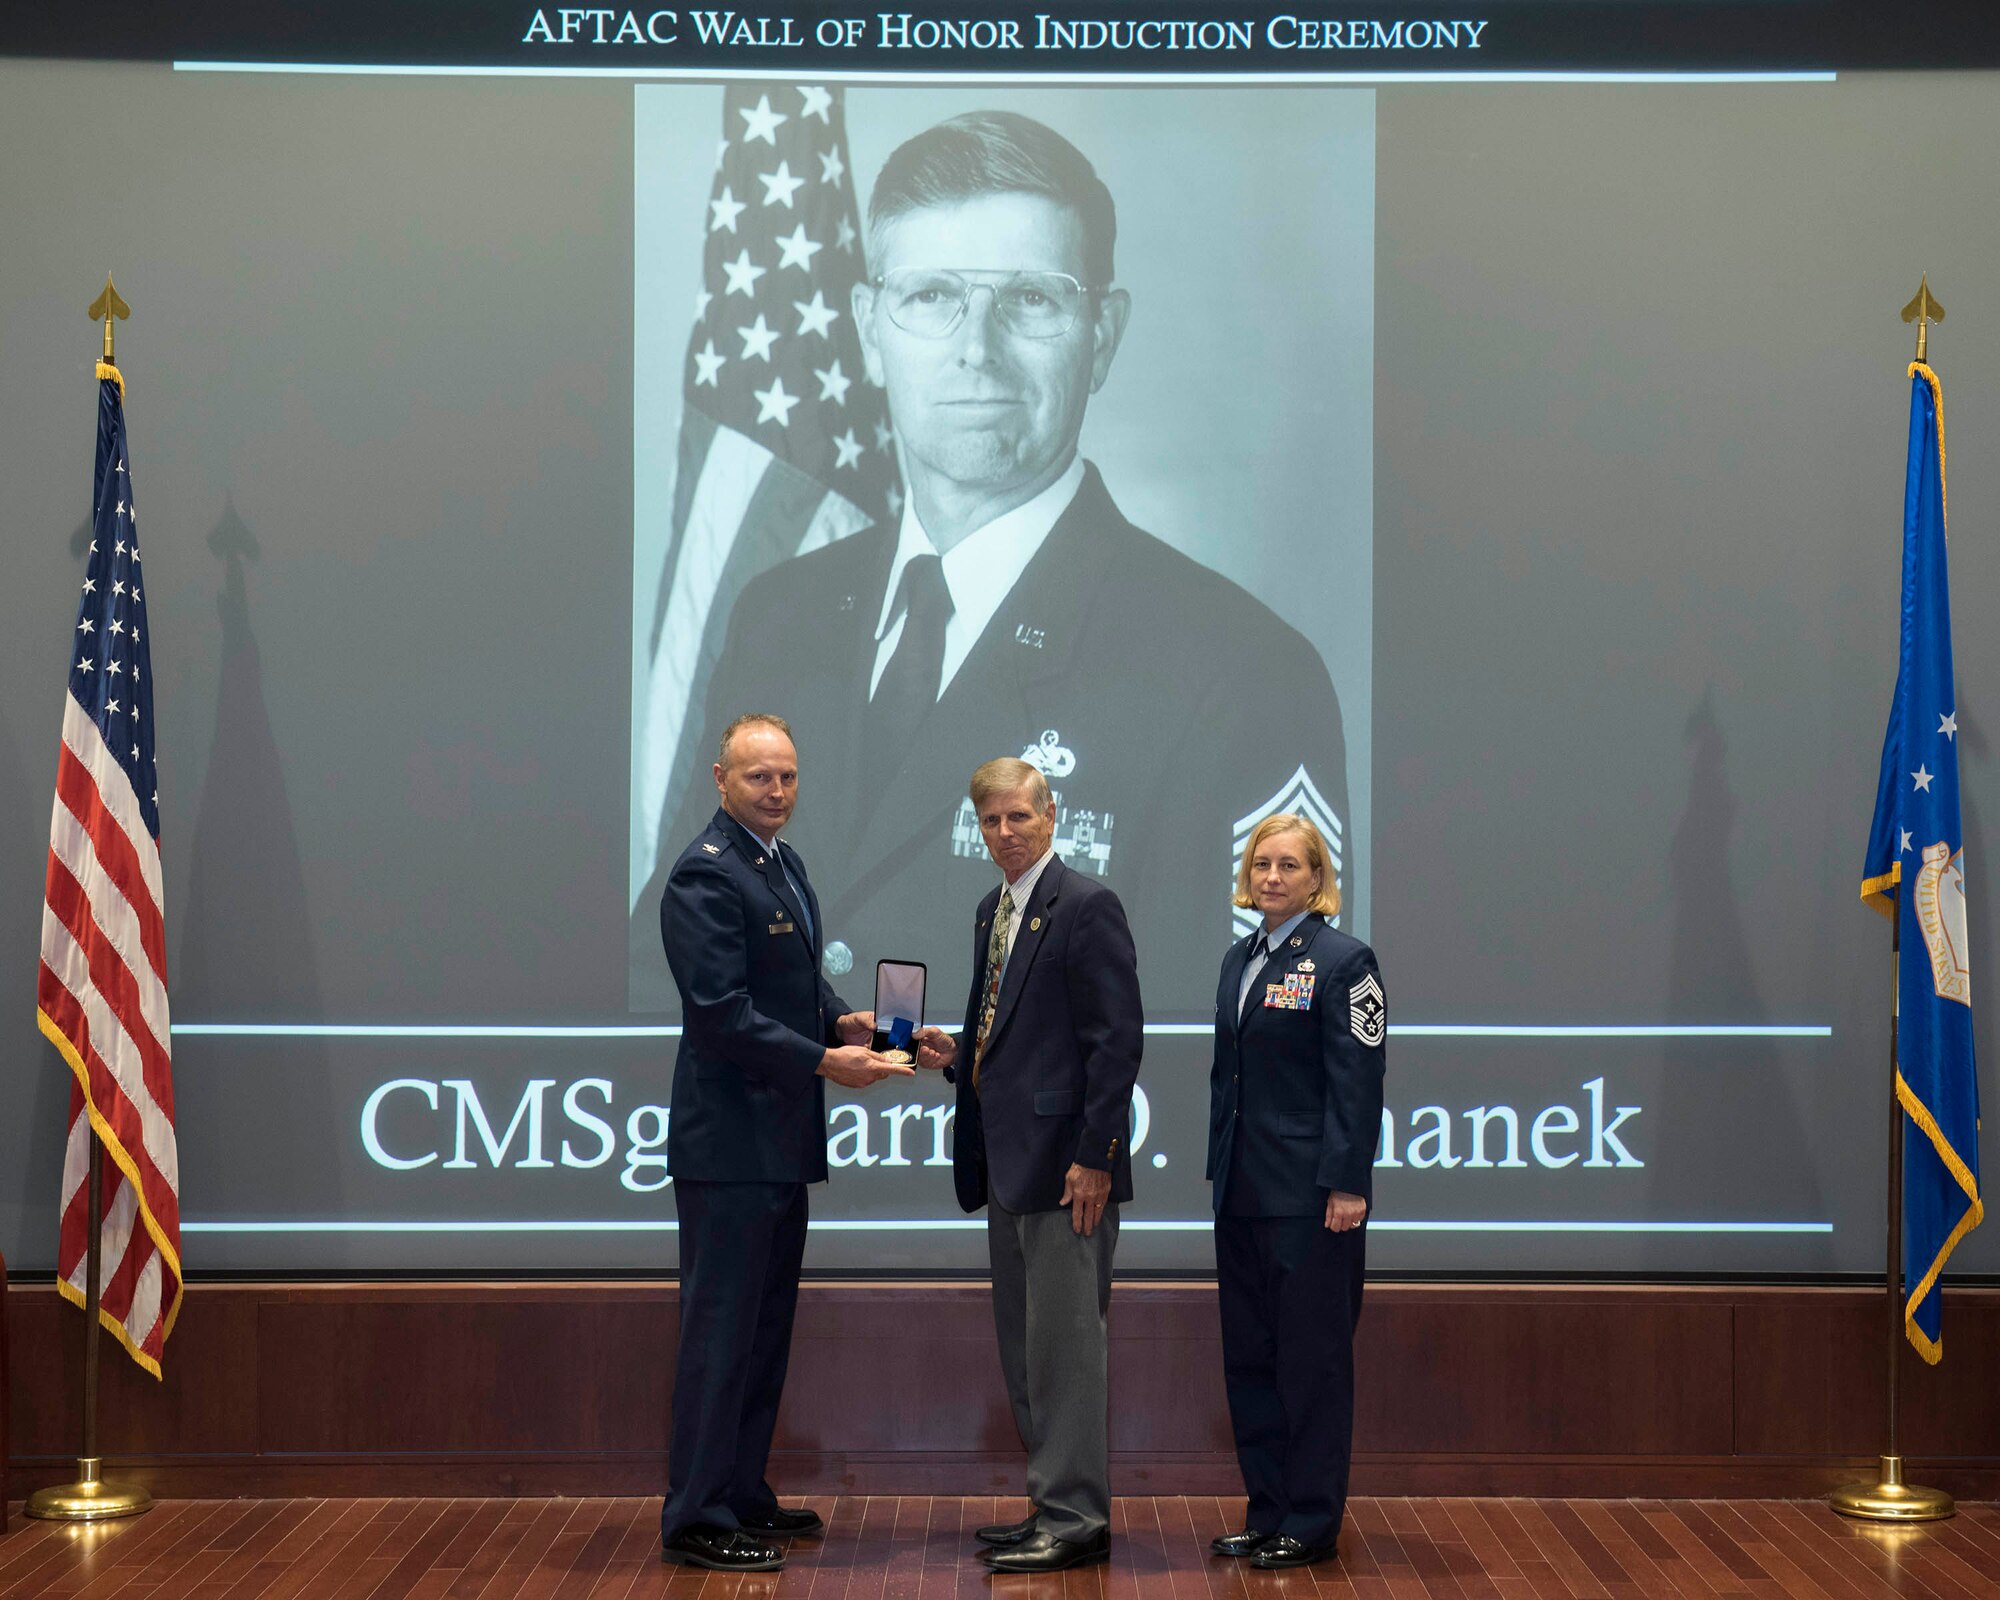 Col. Chad Hartman (left) presents a medallion to retired Chief Master Sgt. Larry Silhanek at a ceremony hosted by the Air Force Technical Applications Center March 11, 2020 at Patrick AFB, Fla.  Silhanek, who was inducted into AFTAC's Wall of Honor, spent 30 year on active duty involved in the center's long range detection mission.  Also pictured is Chief Master Sgt. Amy Long, AFTAC's command chief.  (U.S. Air Force photo by Matthew S. Jurgens)